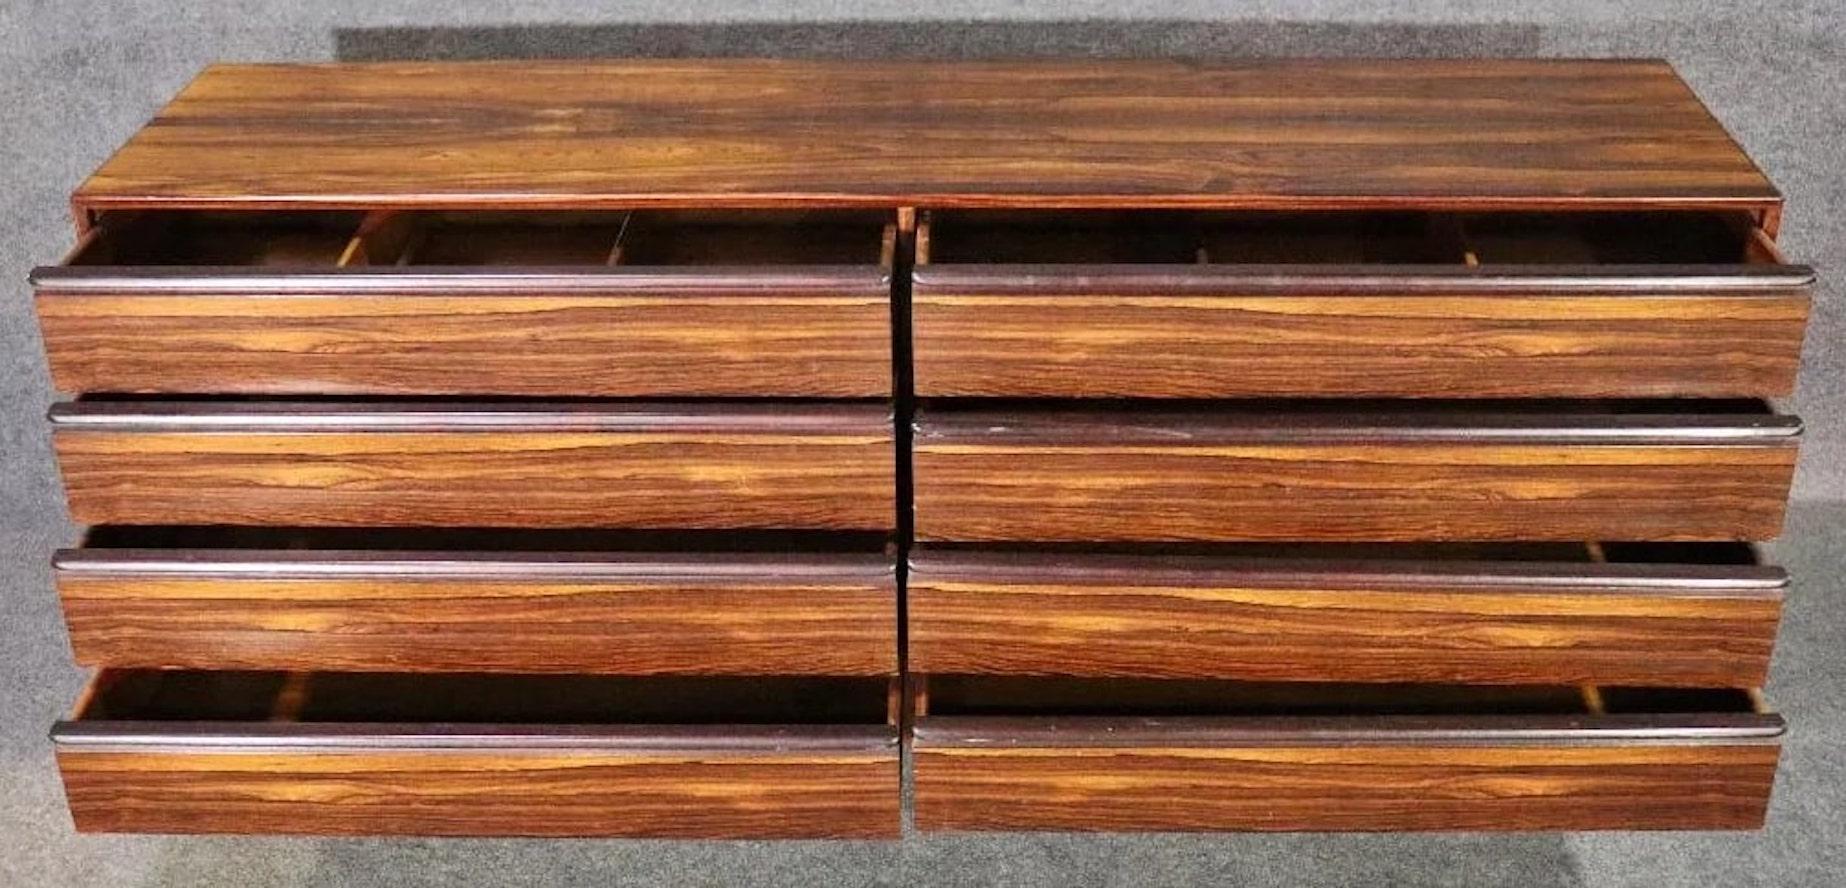 Long chest of drawers in rich rosewood grain. Made by Westnofa in Norway, with finished back and long sculpted handles.
Please confirm location NY or NJ.